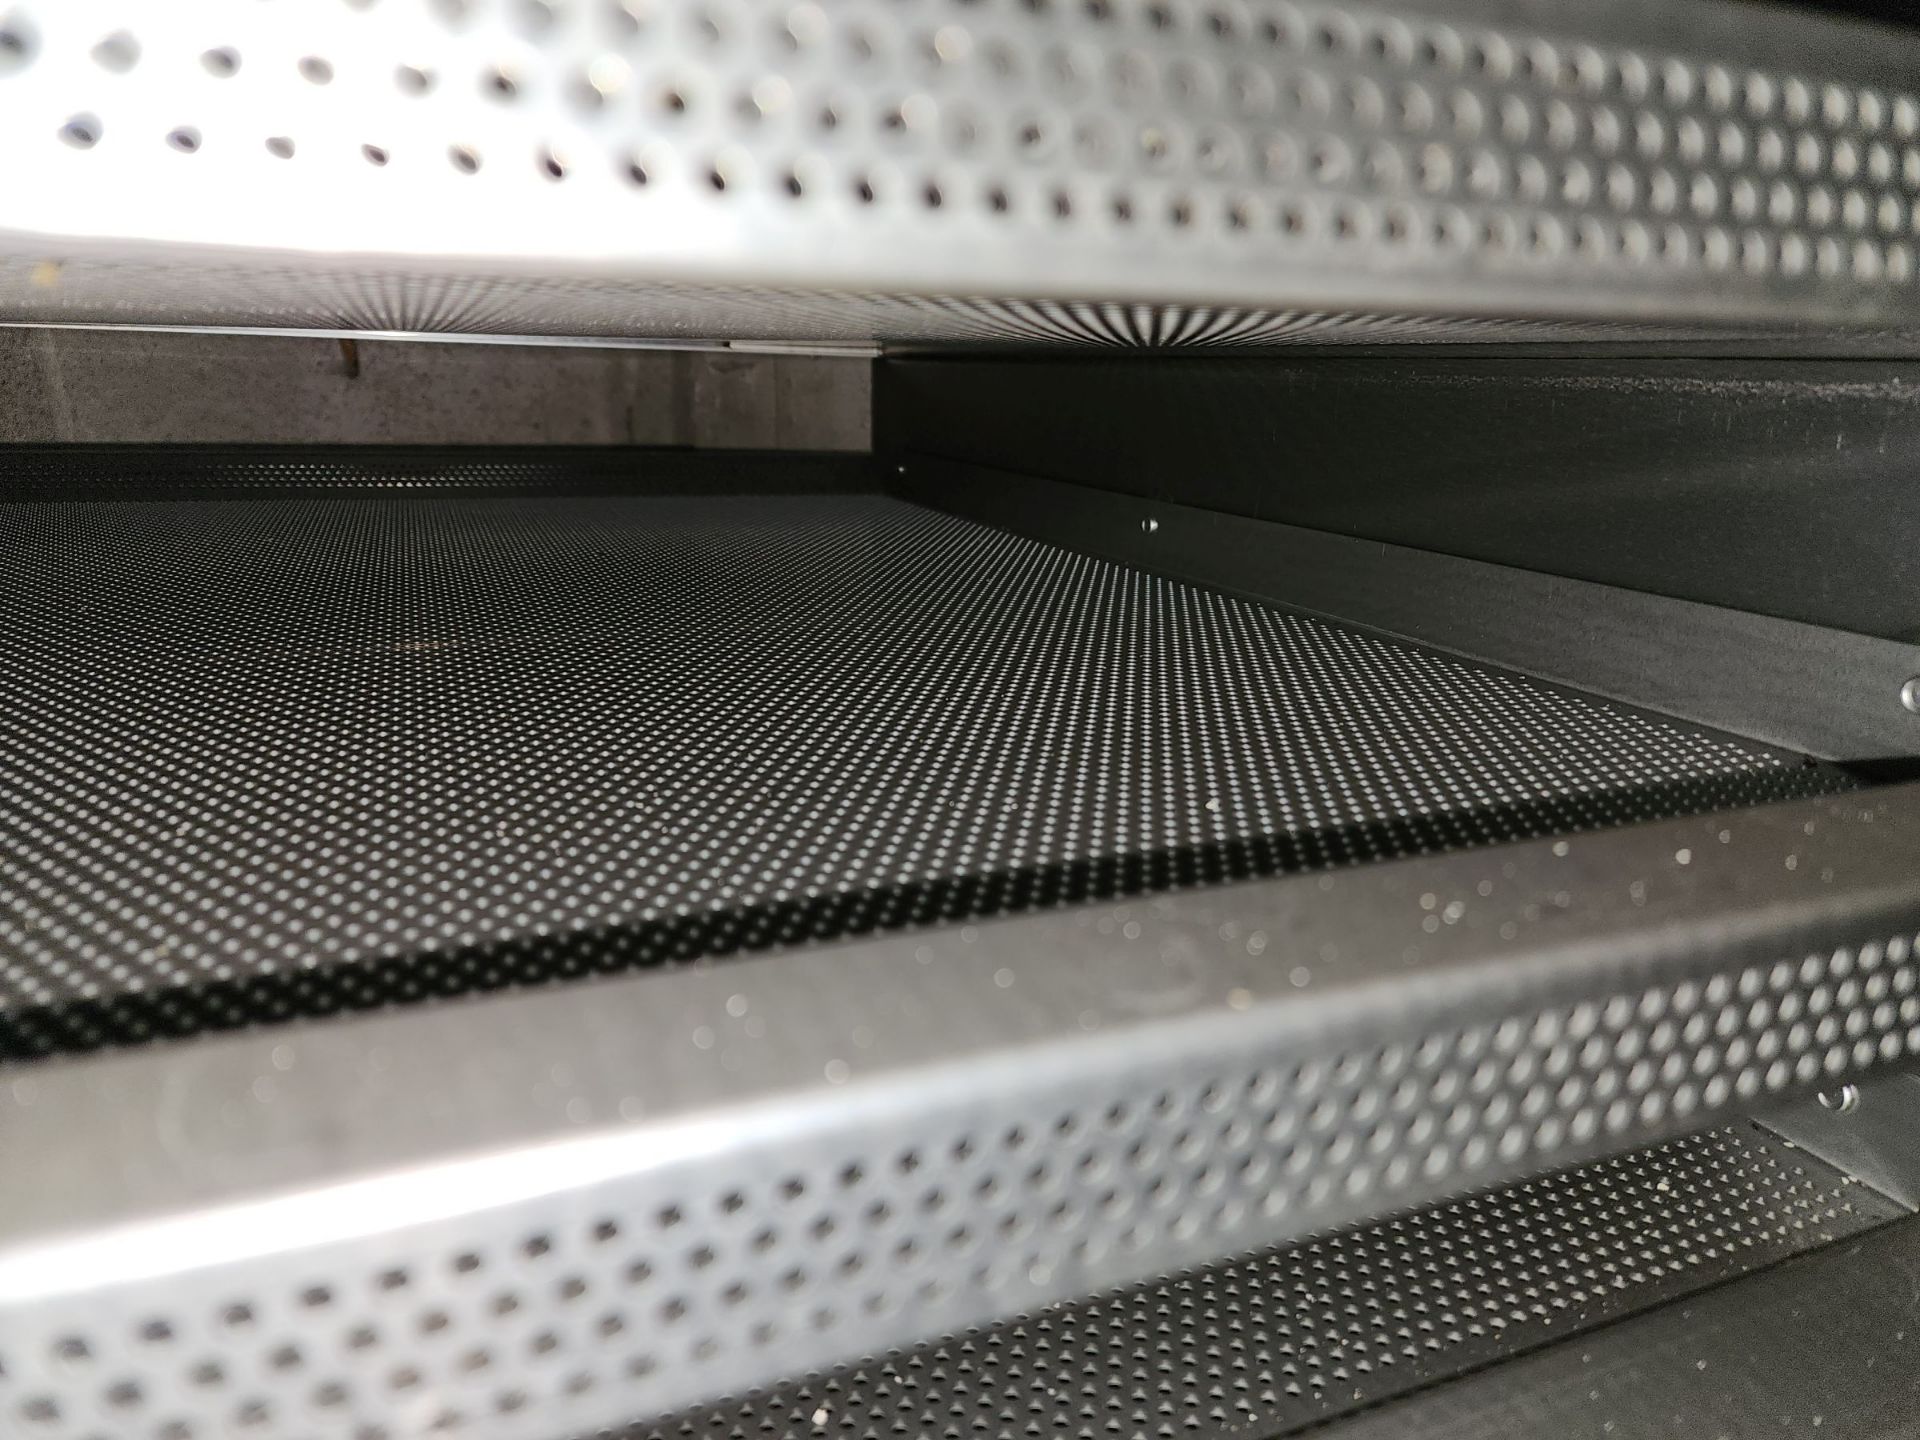 Stack of (25) Aluminum Trays, perforated, on Transport cart - Image 8 of 9